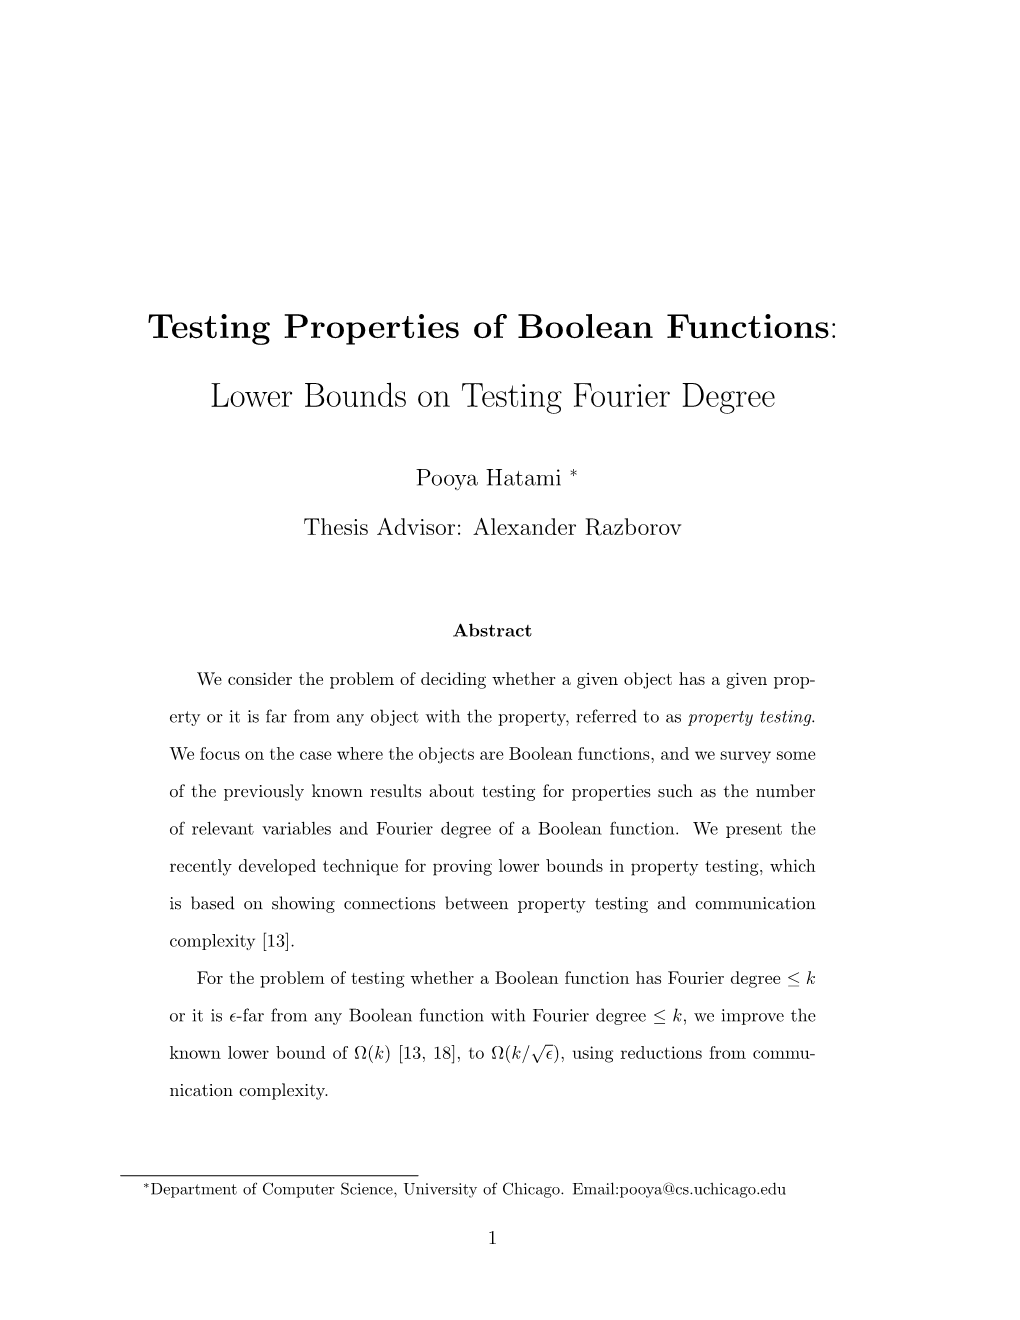 Testing Properties of Boolean Functions: Lower Bounds on Testing Fourier Degree